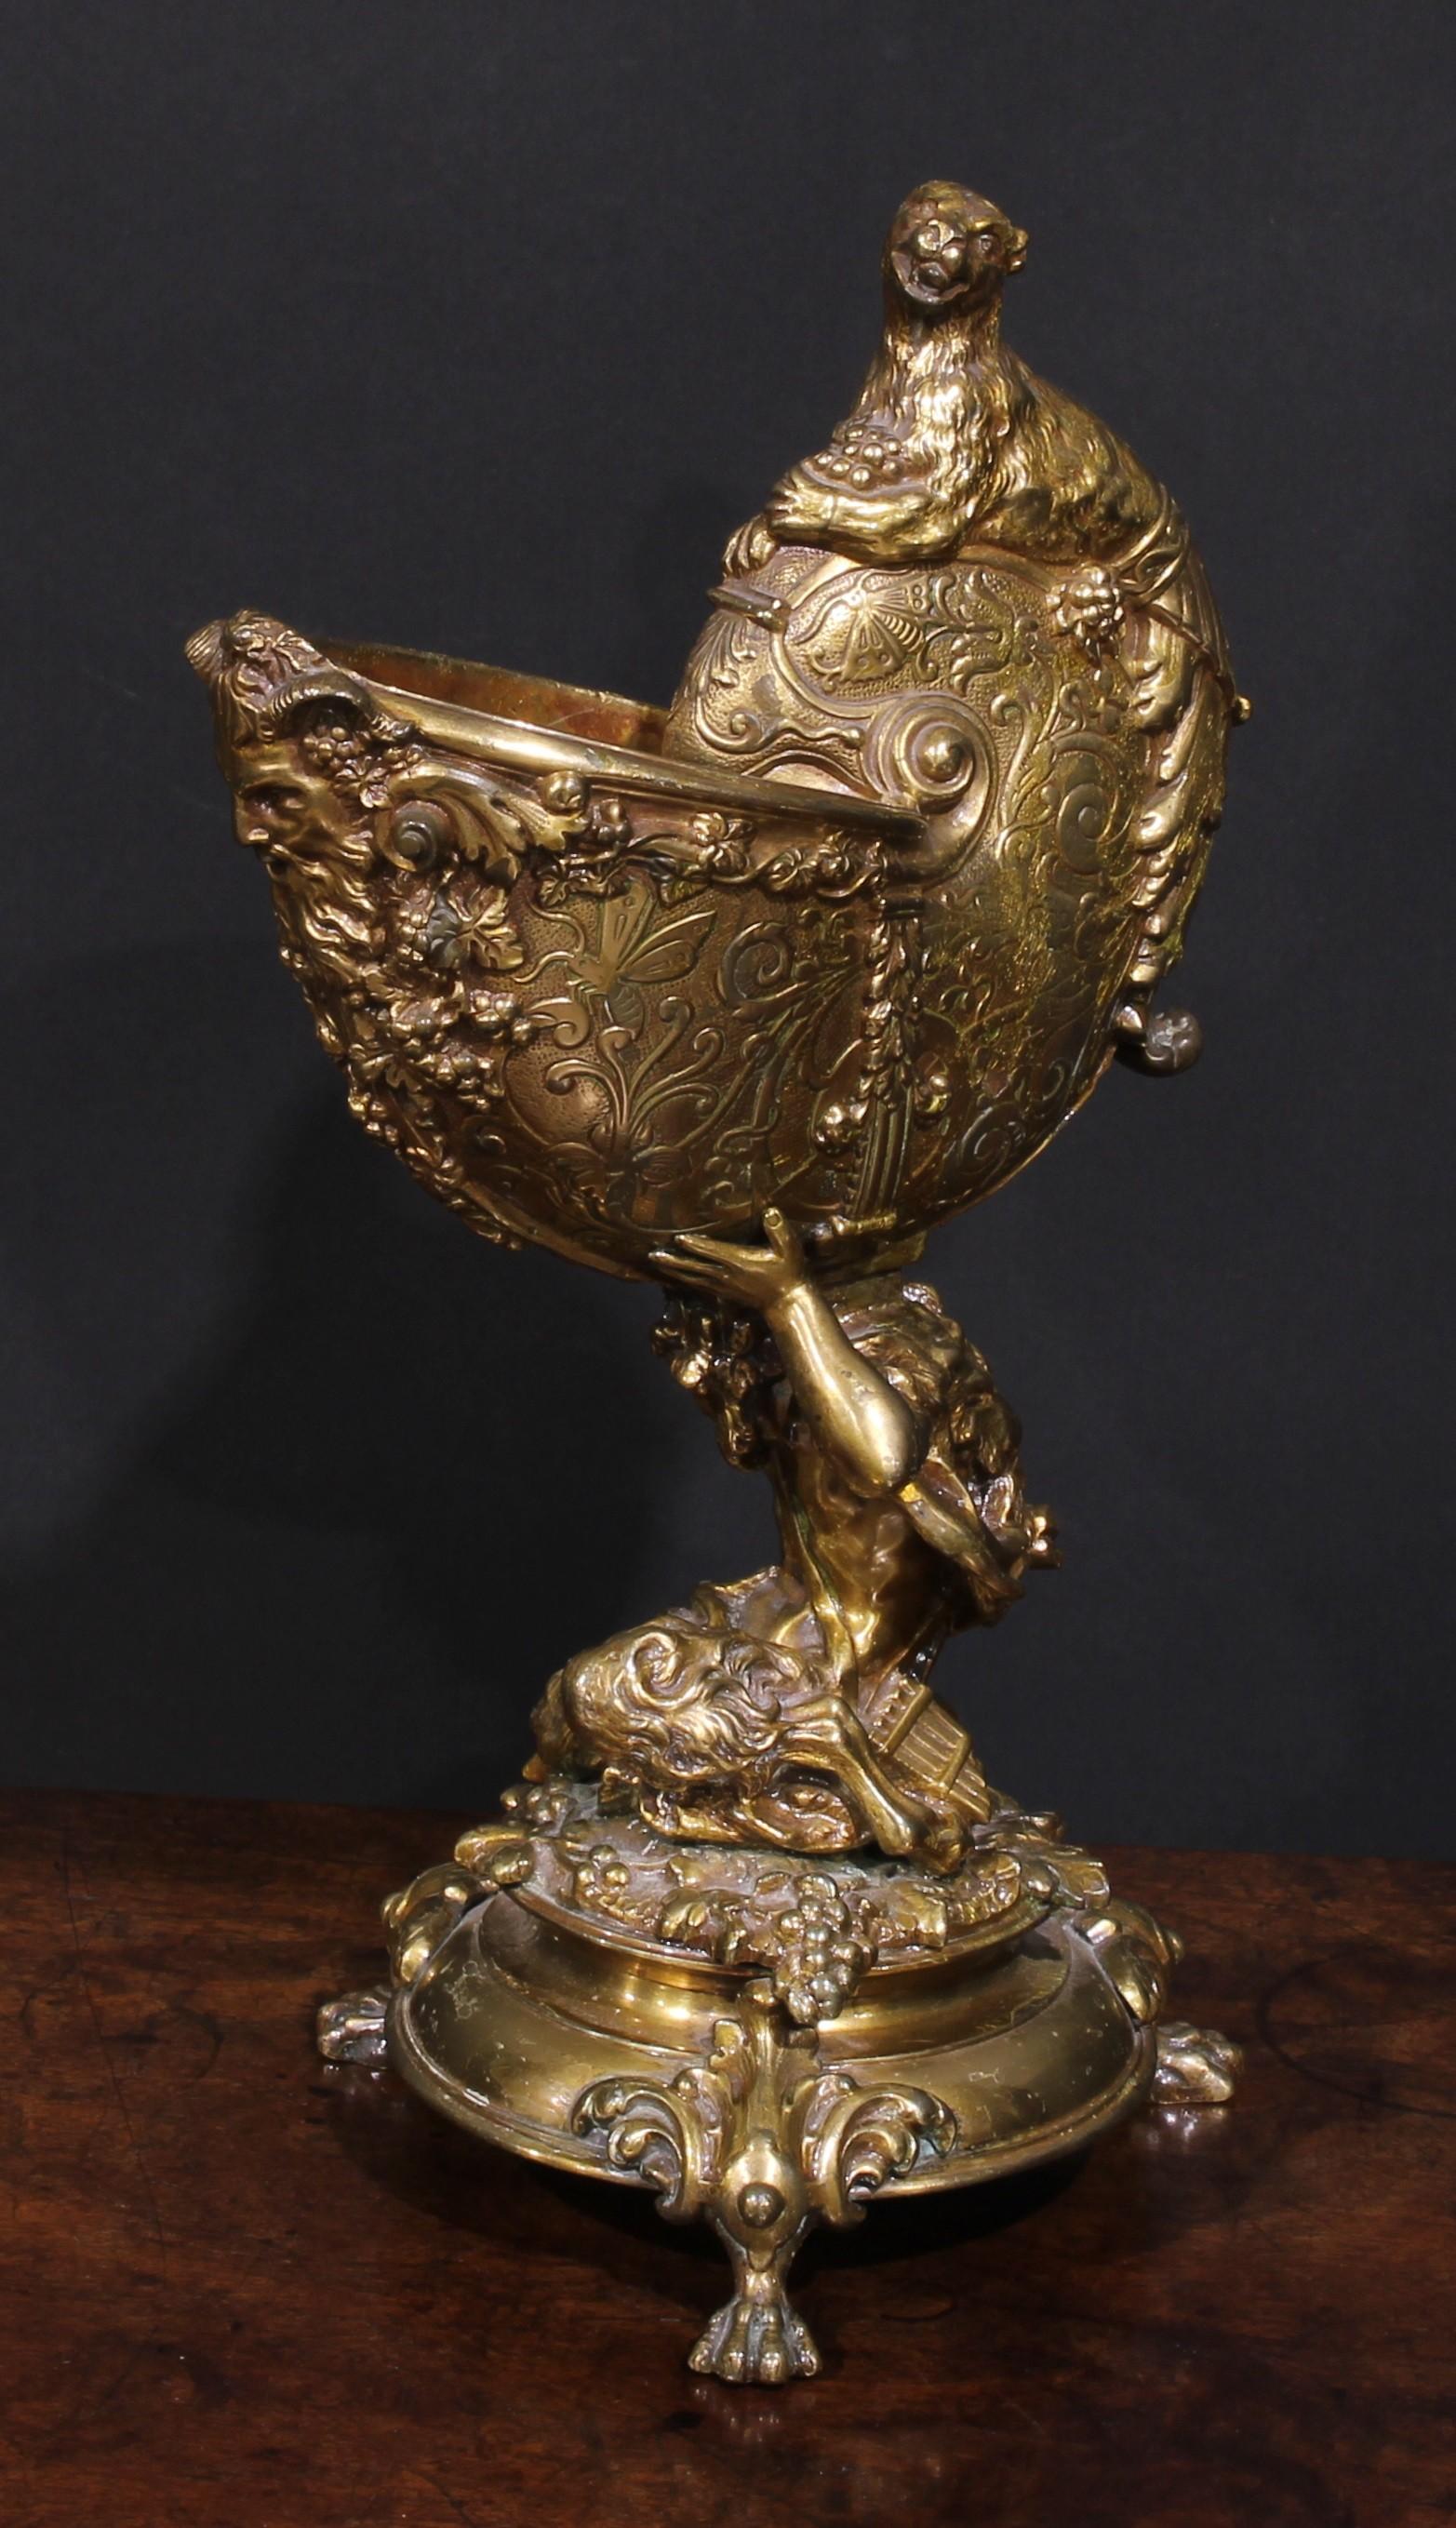 19th Century Gilt Bronze Dutch Paw-Footed Nautilus Cup with Satyr & Bacchus
Dating to late 19th century
From a private collection

Nautilus cups were considered luxury items and symbols of wealth and sophistication during the Renaissance. The